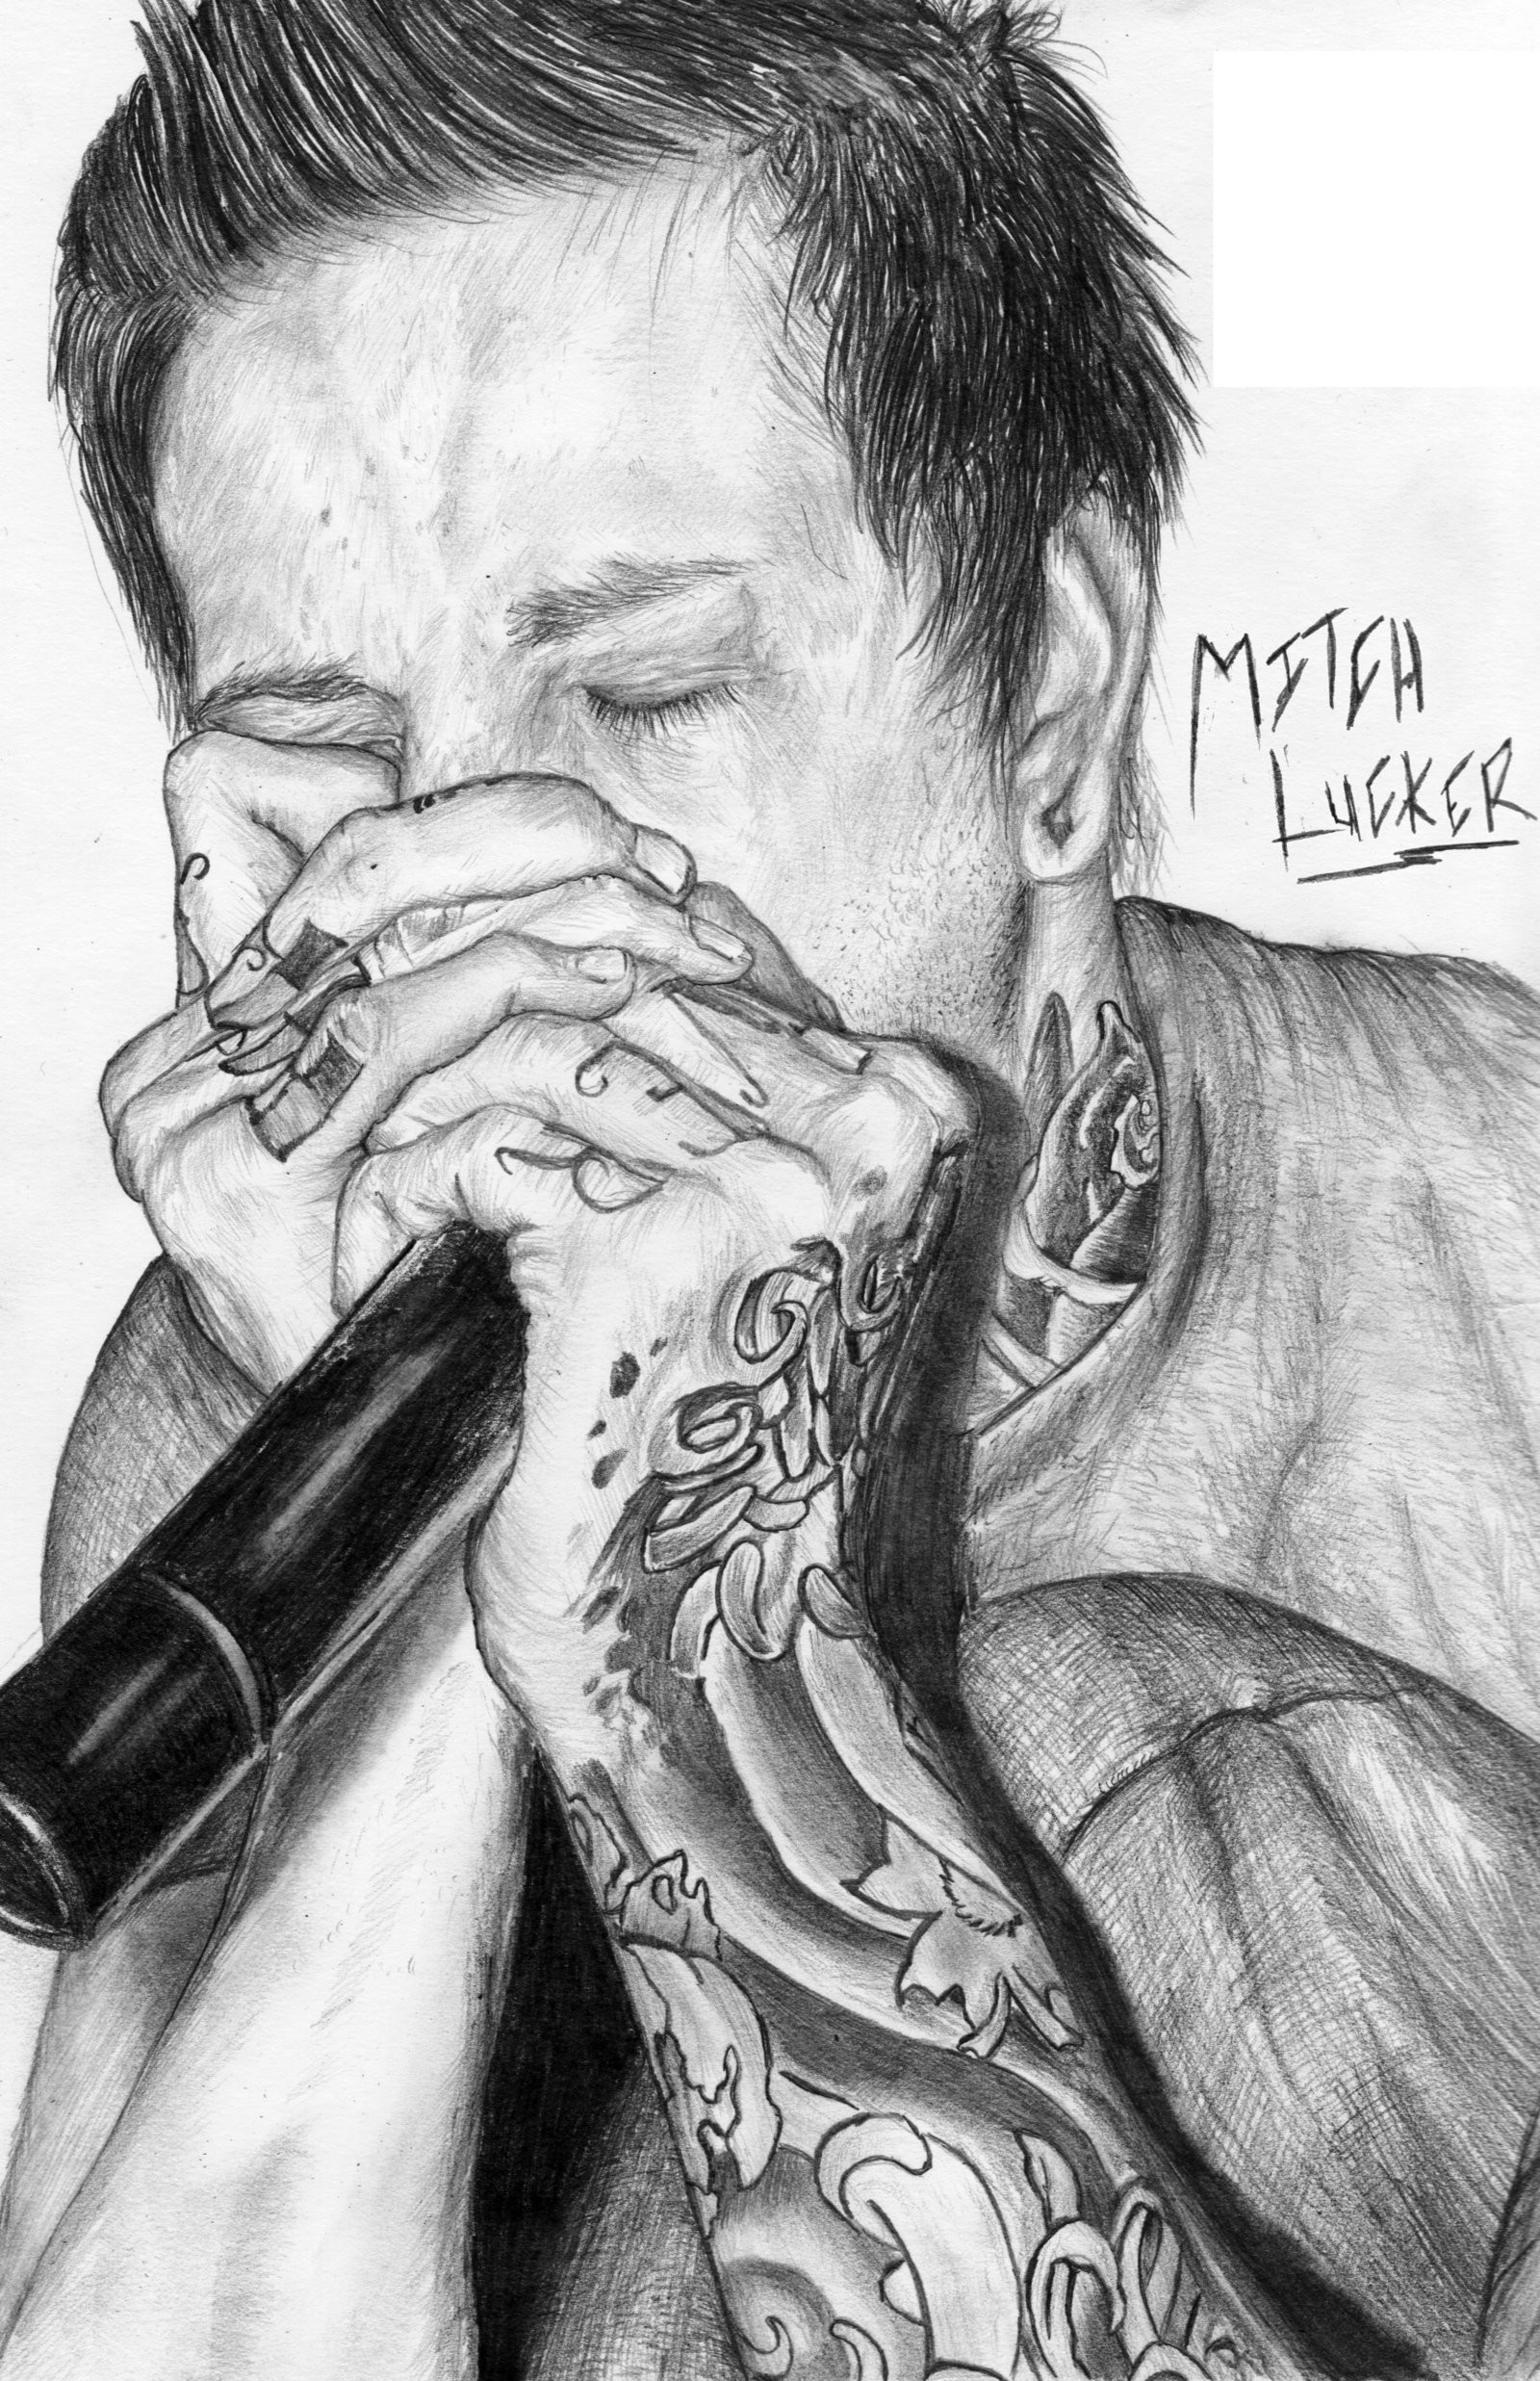 1600x2473 ... Mitch Lucker - Suicide Silence by JamieHargrave